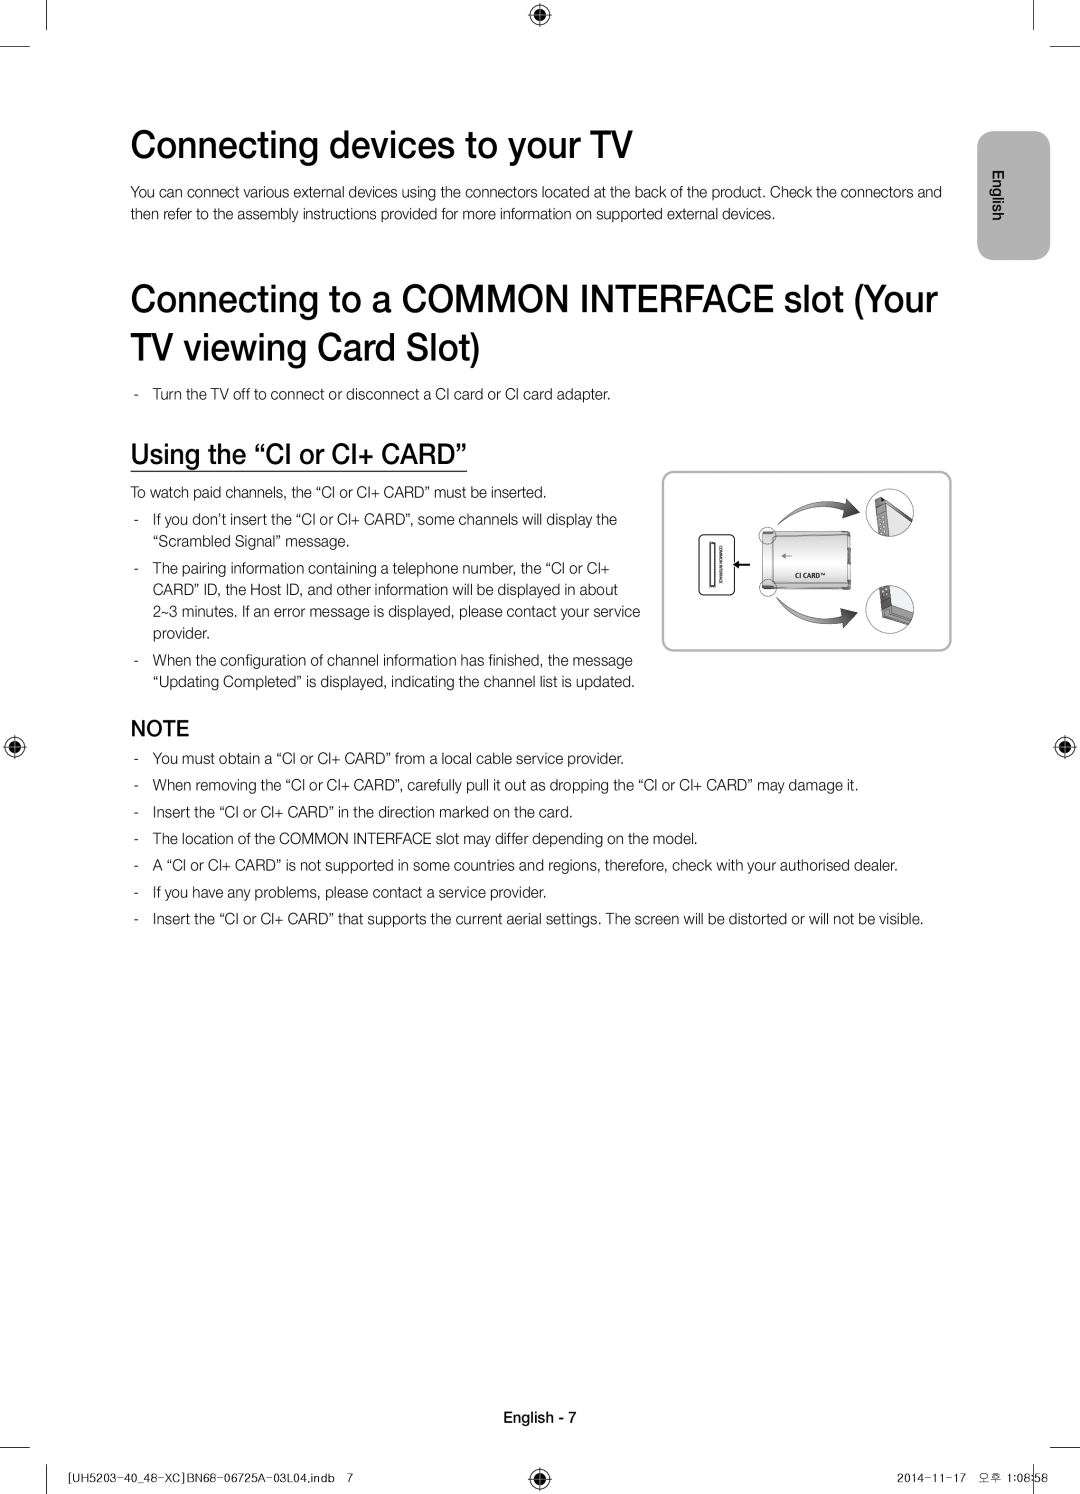 Samsung UE48H5203AWXXC Connecting devices to your TV, Connecting to a COMMON INTERFACE slot Your TV viewing Card Slot 